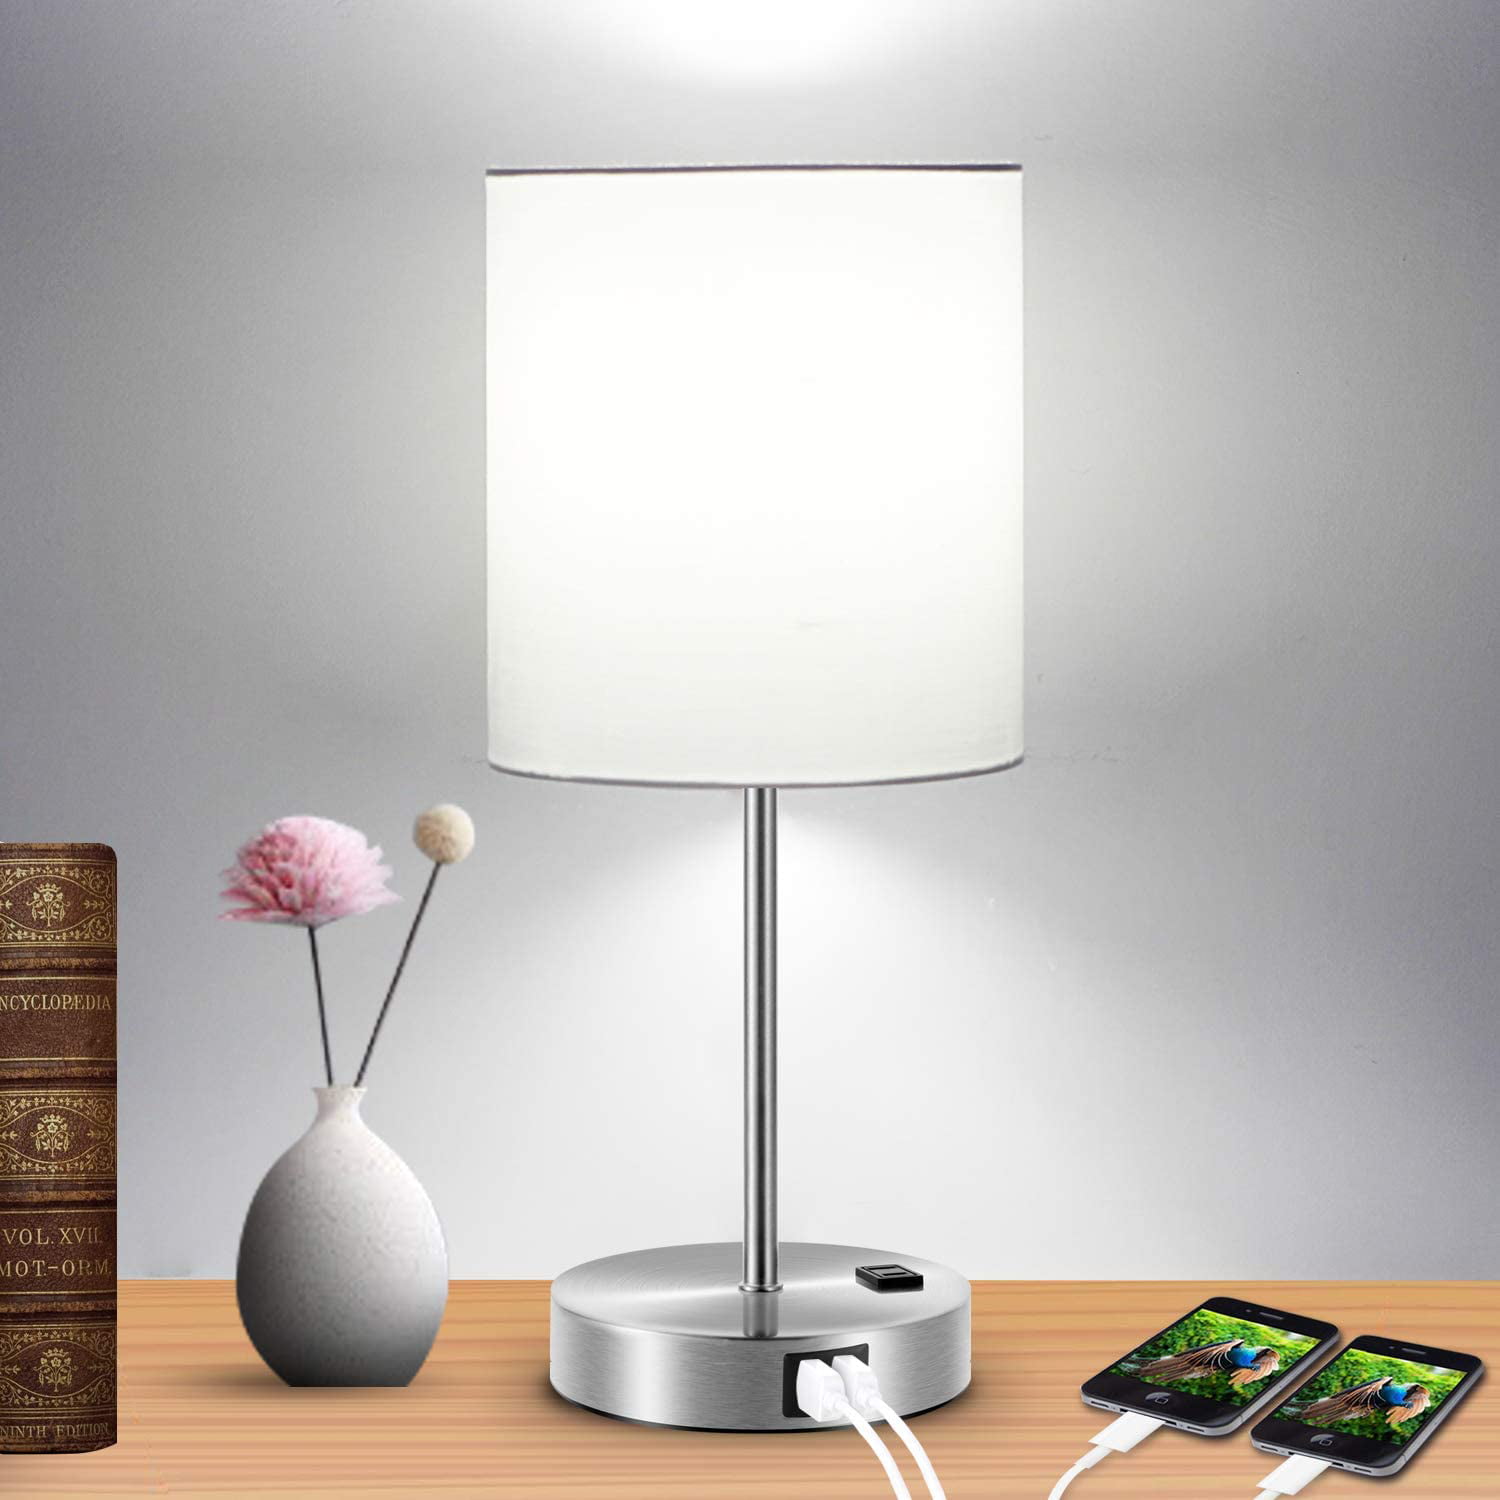 Bedside Lamp Nightstand Usb, Living Room Table Lamp With Usb Port